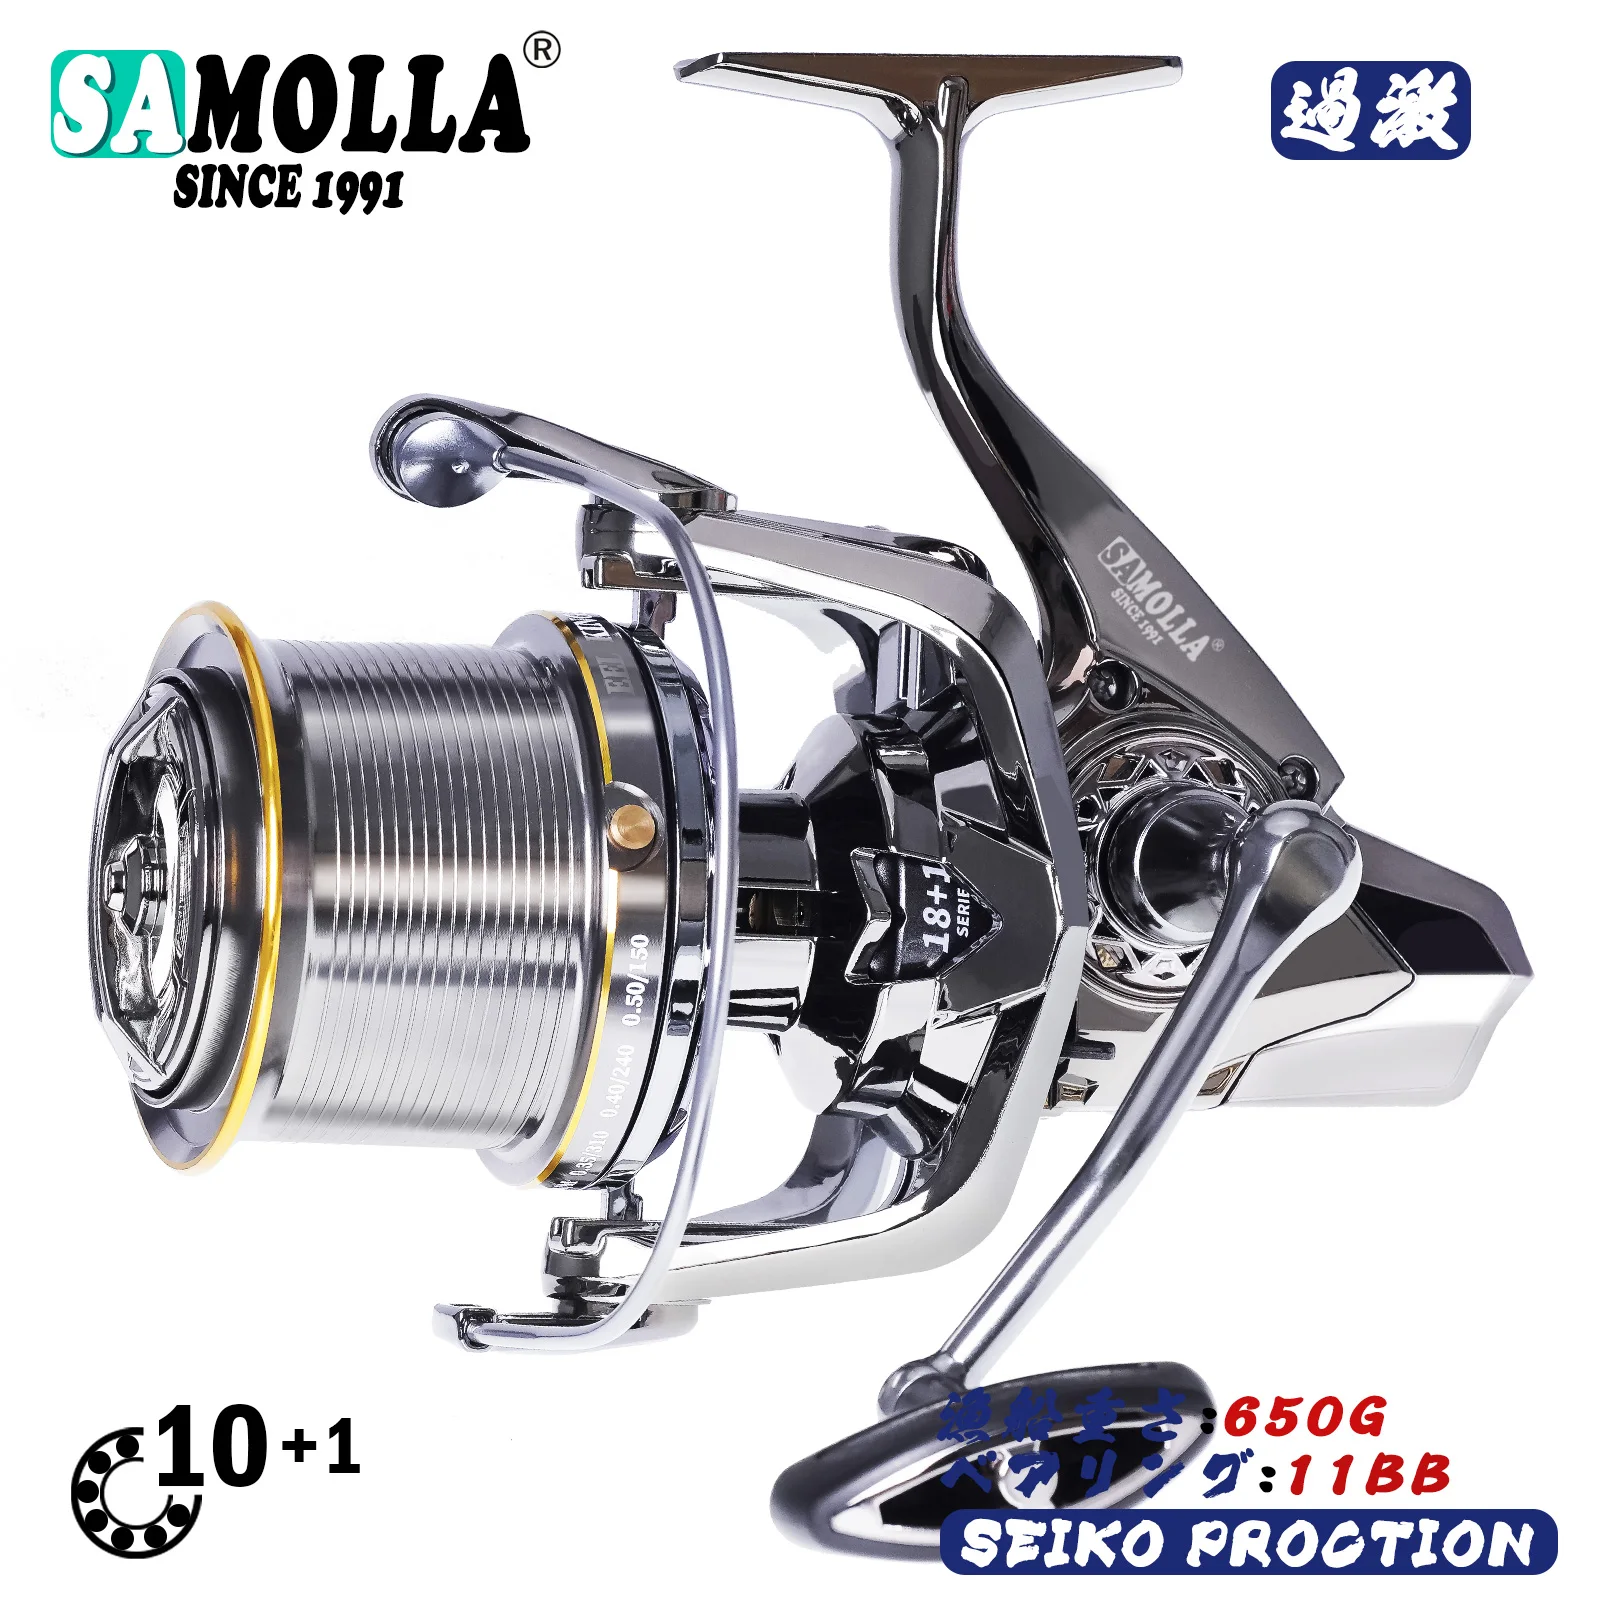 2022 Saltwater Fishing Spinning Reel Coil Surf Distant Wheel 11BB Open Face Carretilha Freshwater Moulinet Wheel TK9000-12000